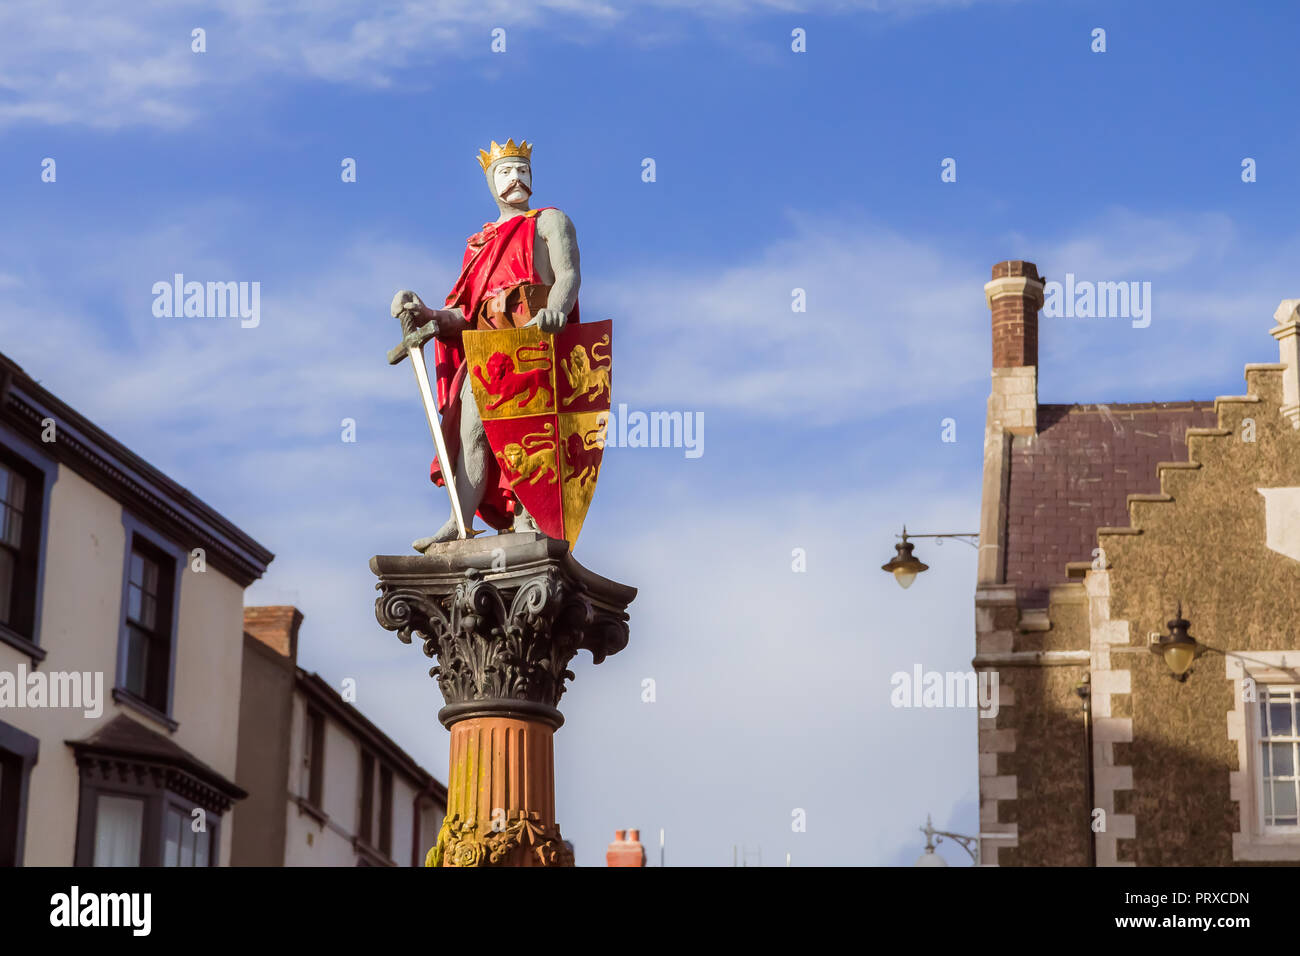 December 2017 - Statue of Prince Llywelyn the Great, 13th centrury ruler of Wales, in the town of Conwy, UK Stock Photo